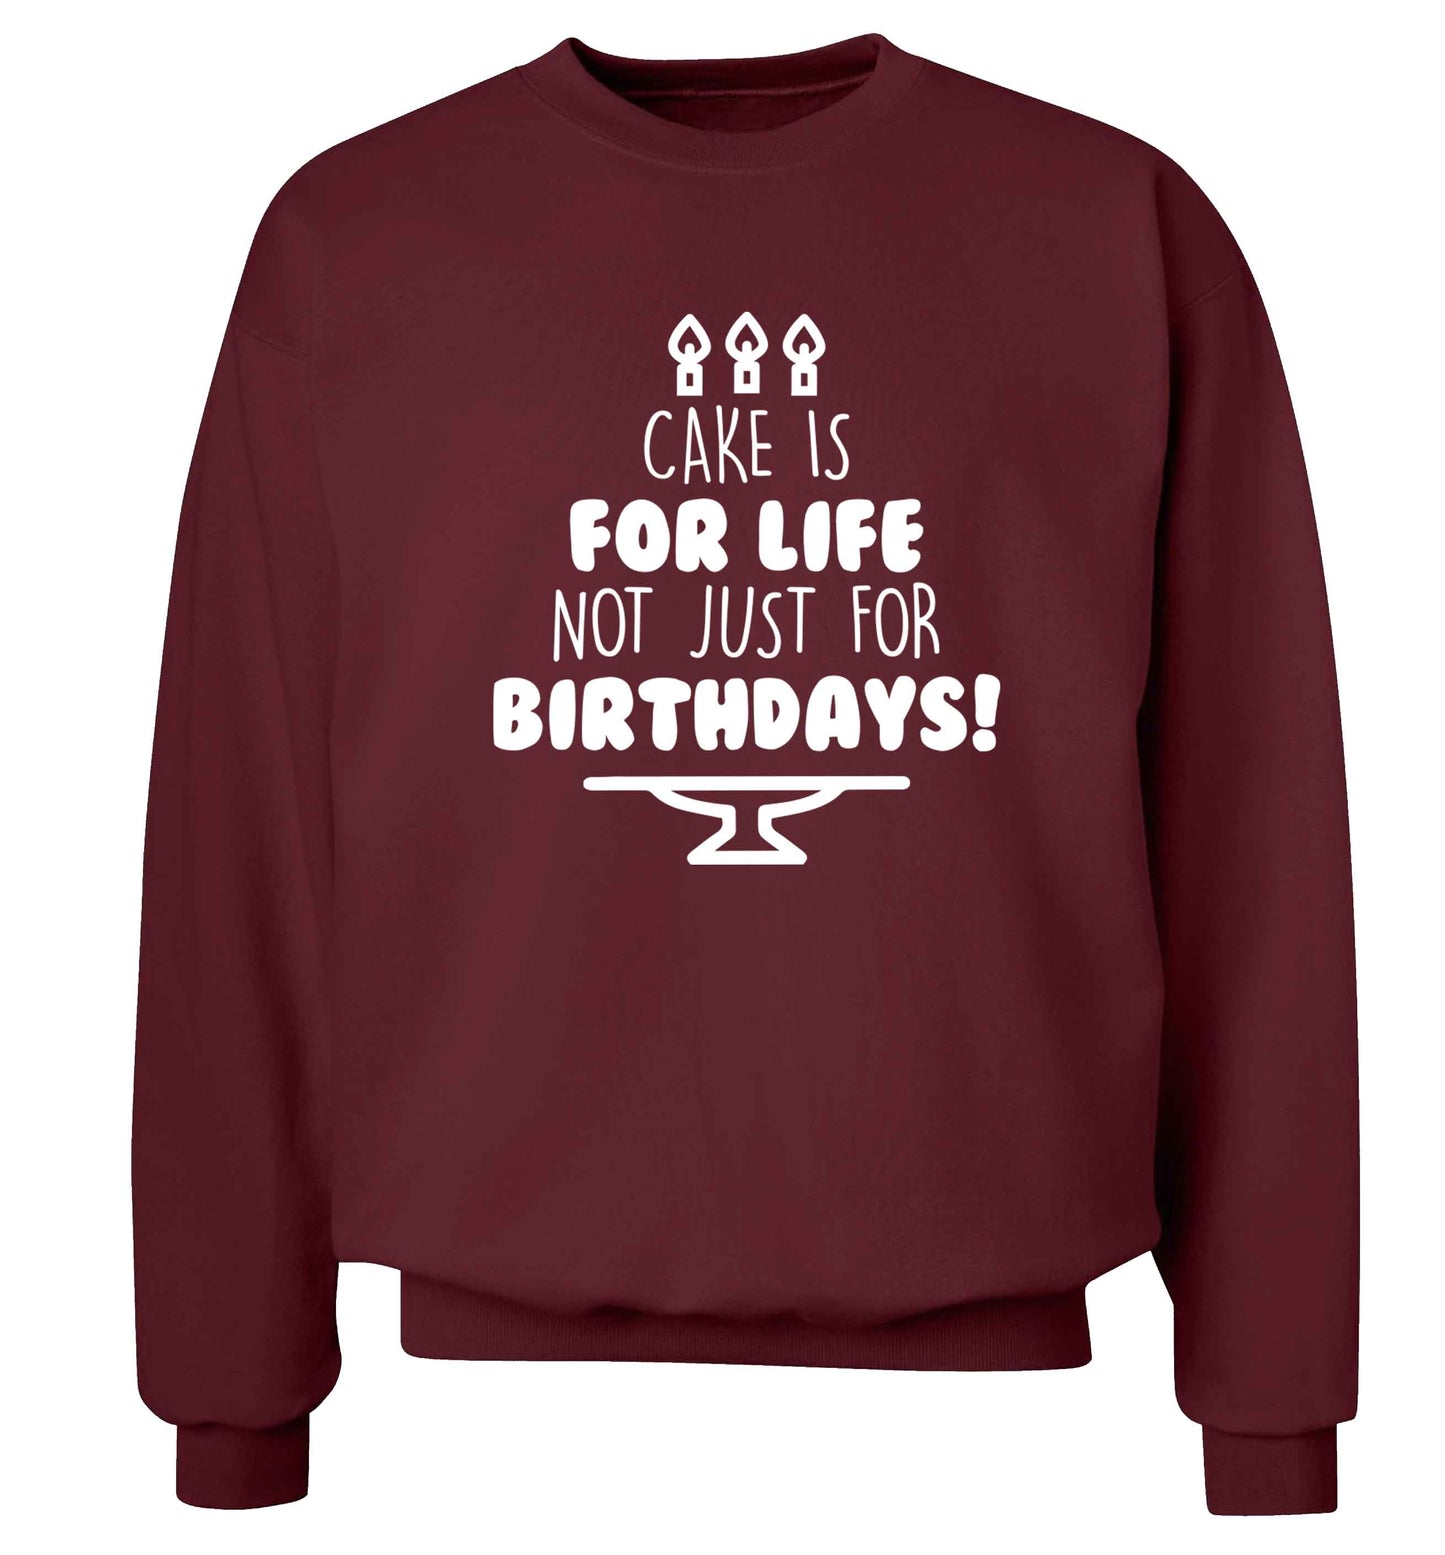 Cake is for life not just for birthdays Adult's unisex maroon Sweater 2XL